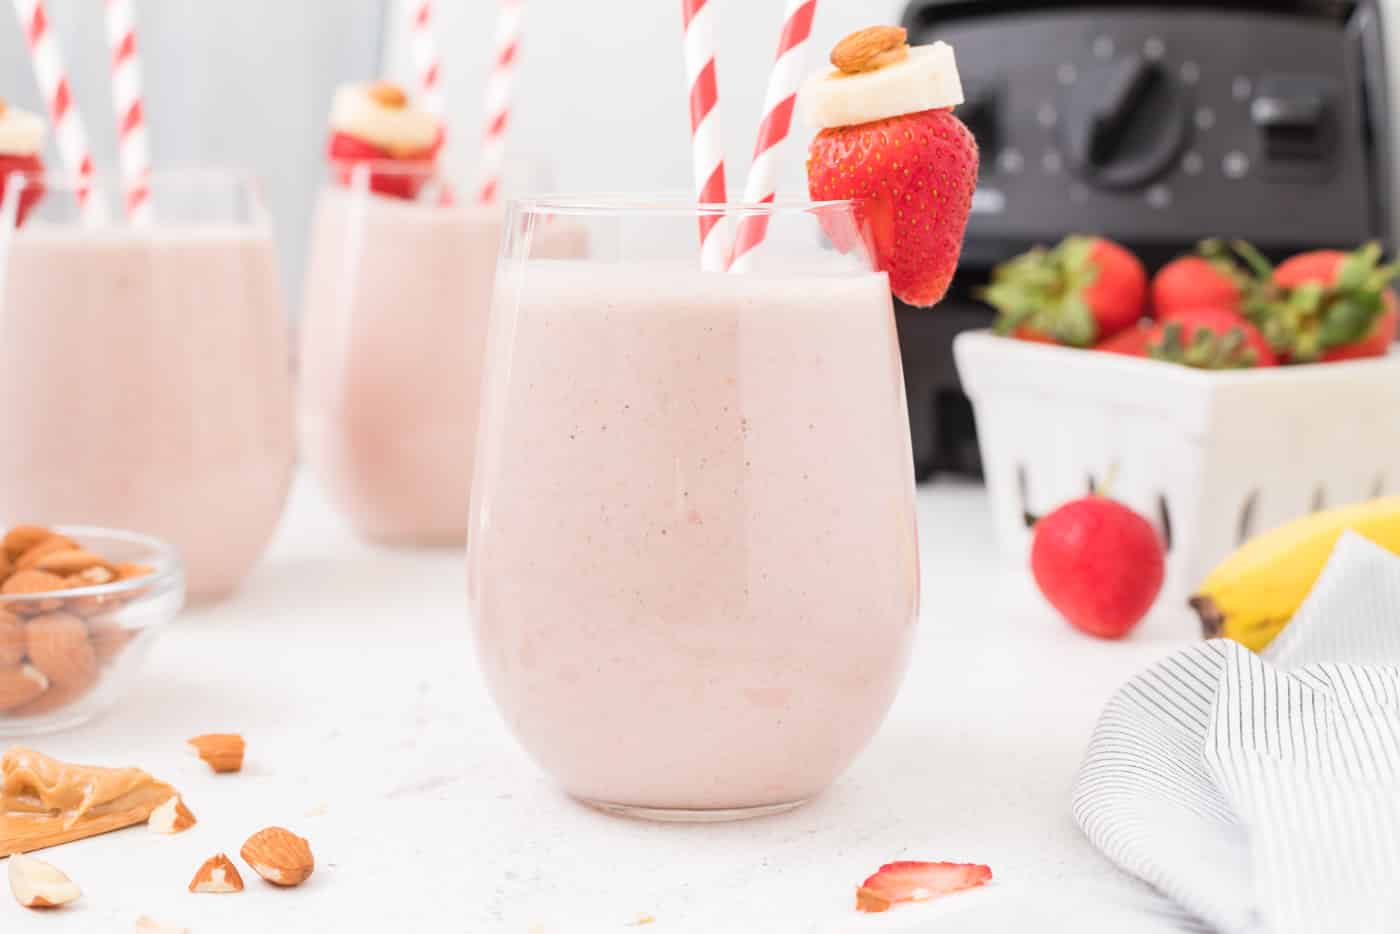 https://www.cleaneatingkitchen.com/wp-content/uploads/2020/06/strawberry-banana-oat-smoothie-1.jpg